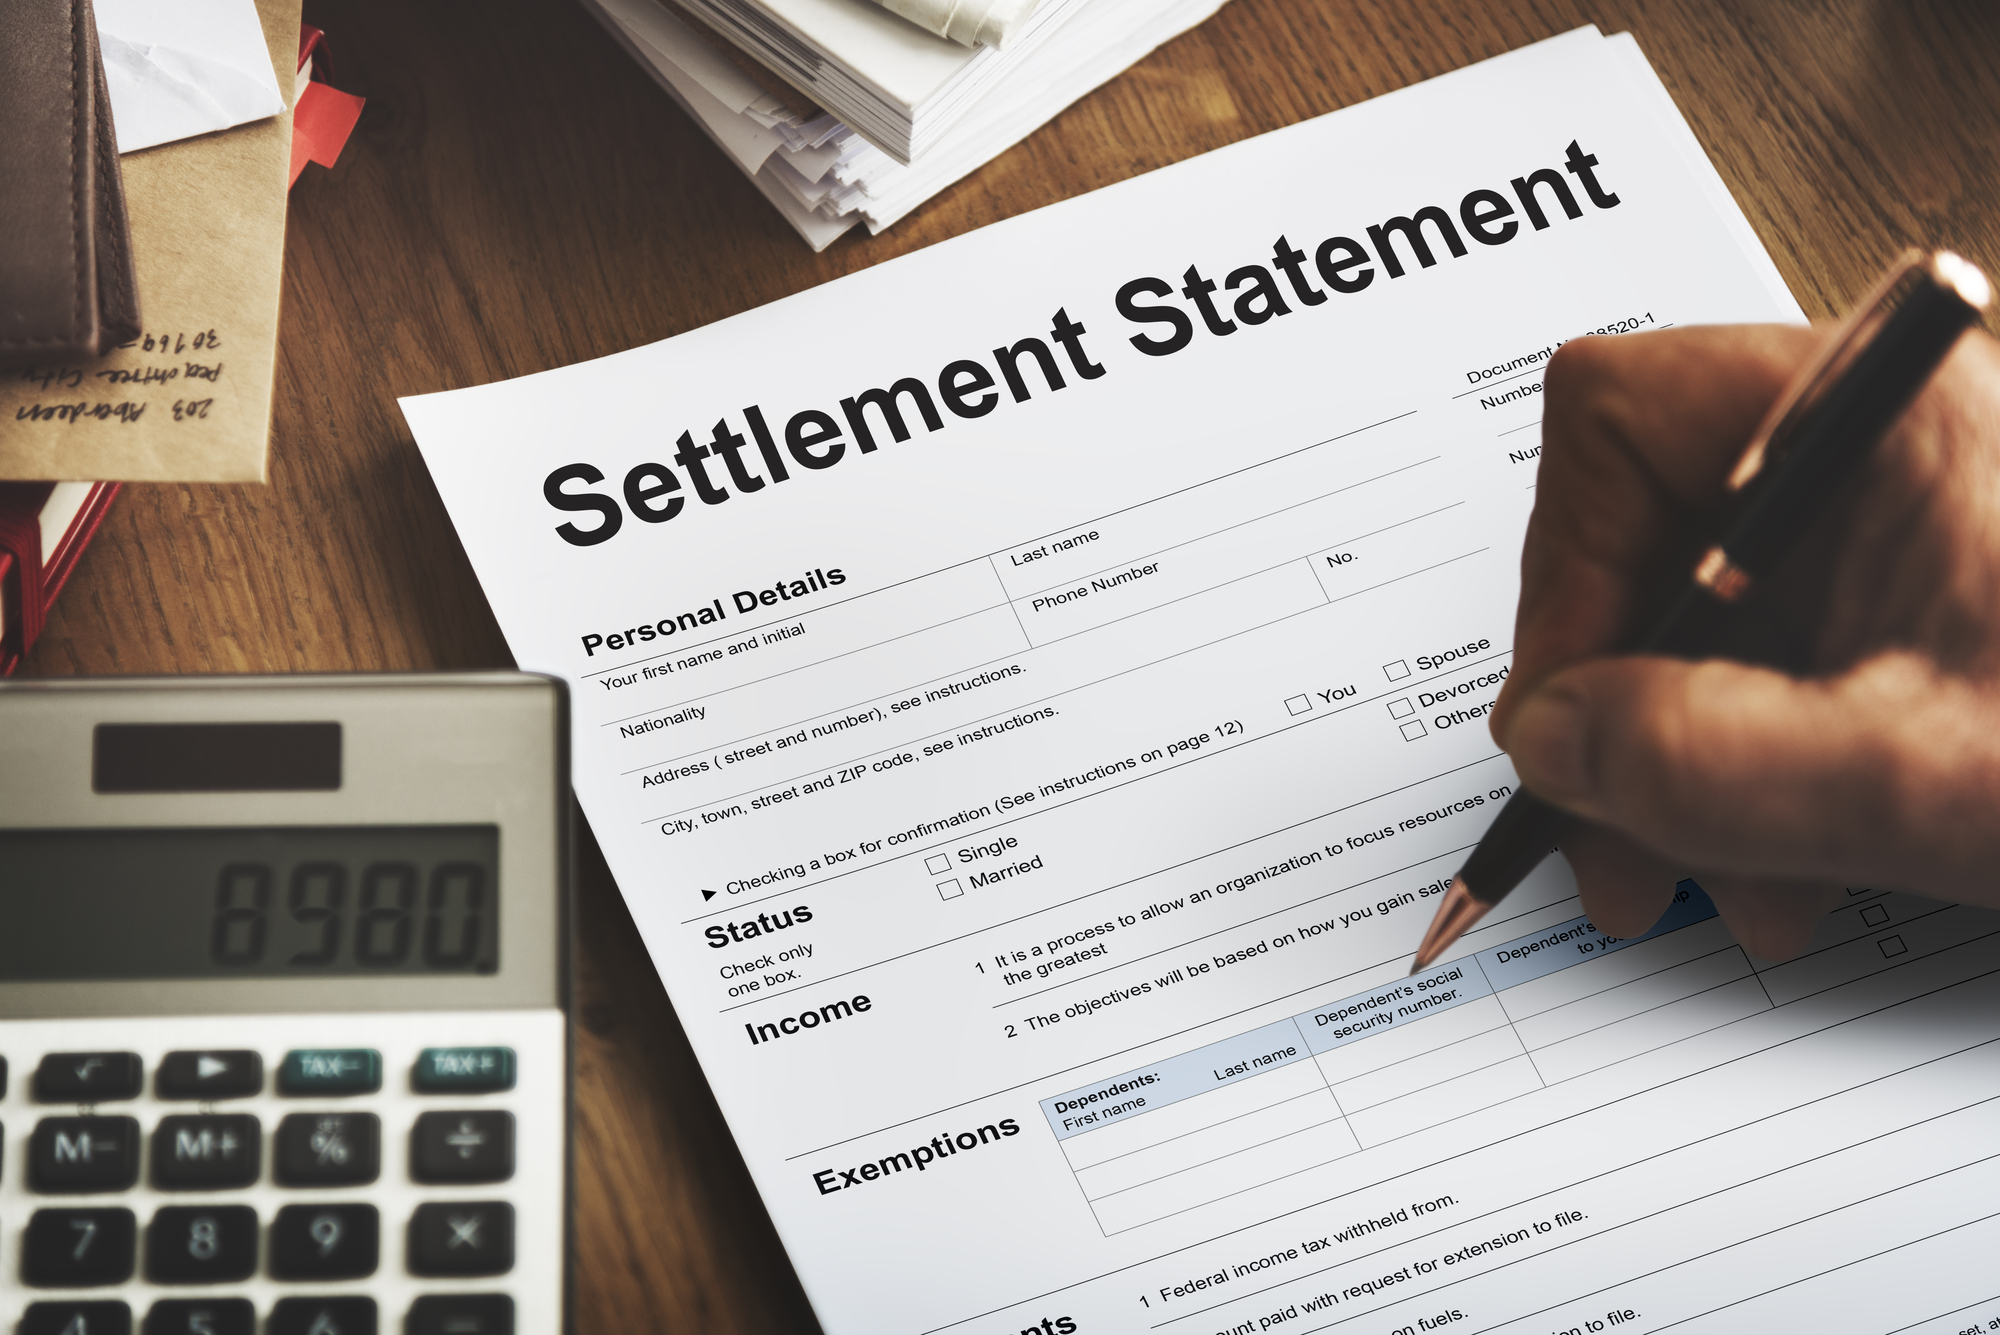 How Long After a Demand Letter Can I Expect Settlement?